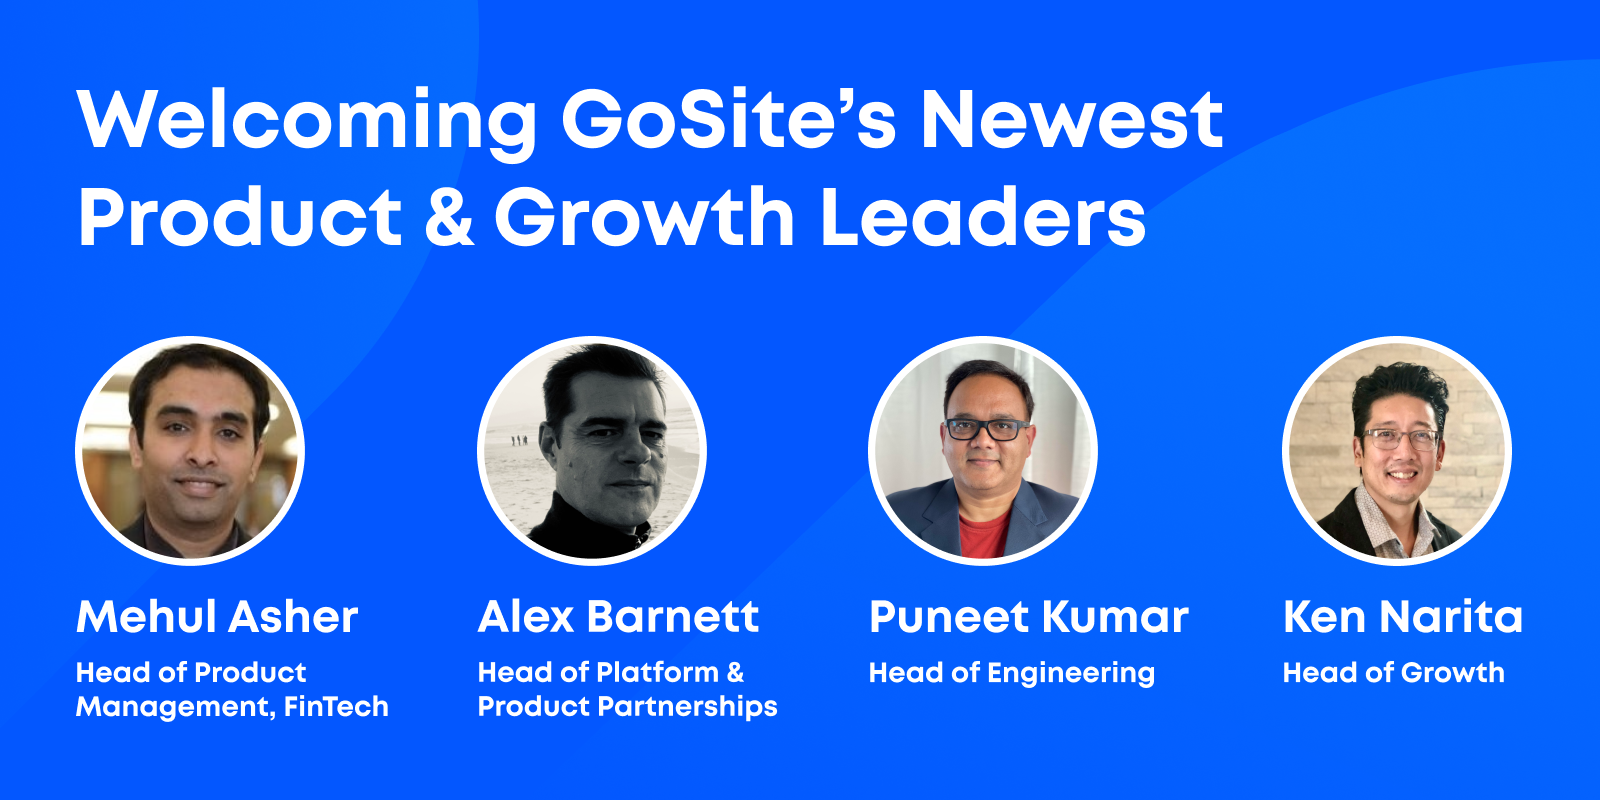 Introducing GoSite's Newest Product & Growth Leaders